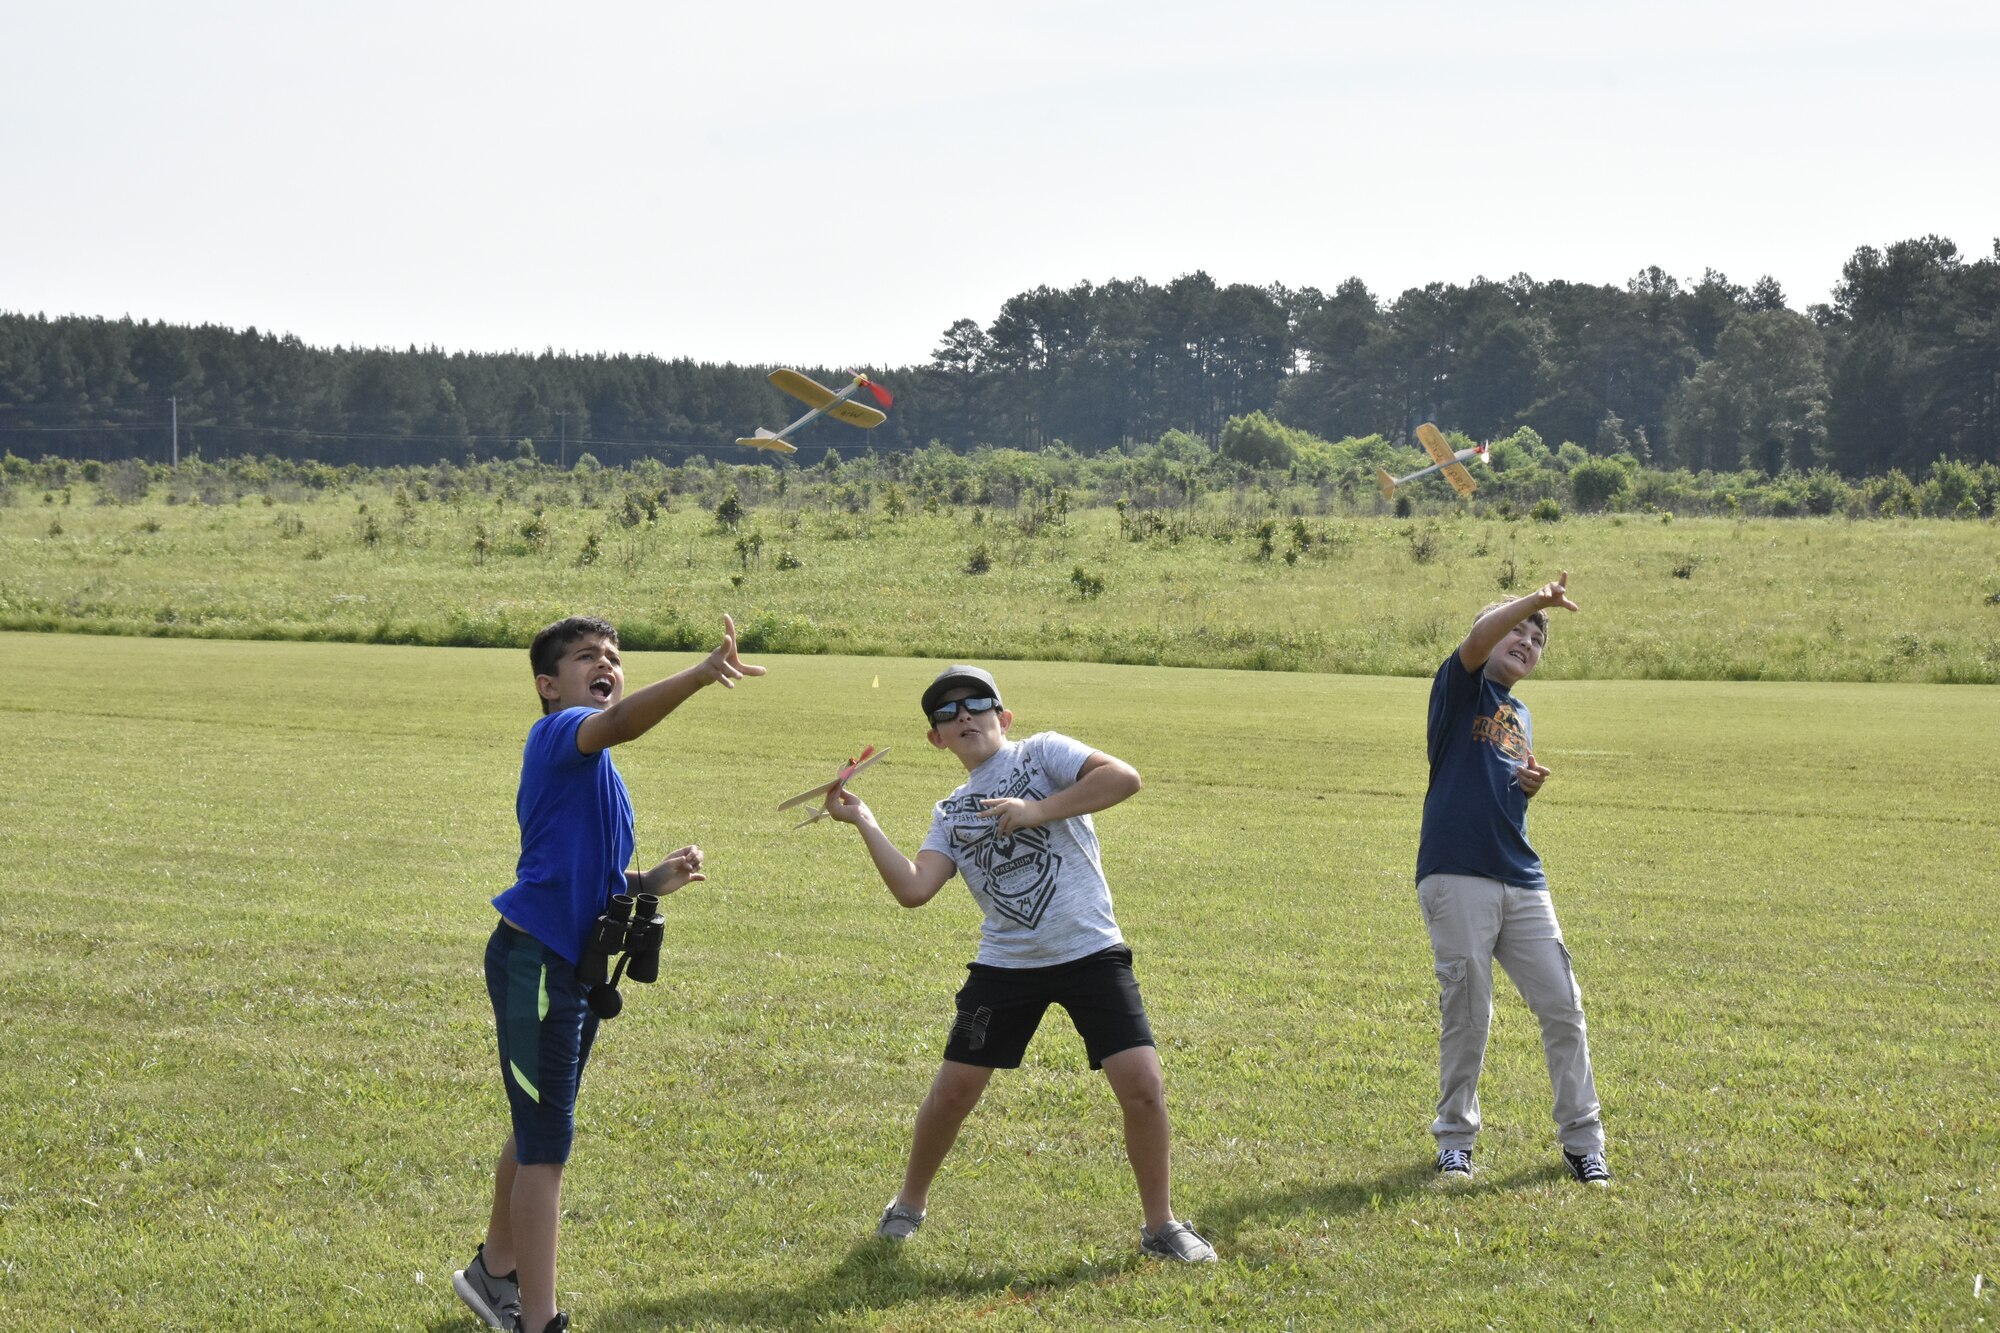 Miland Bonner, left, Bryce Spencer, center and Brandon Prince give their balsa wood planes a toss during a June 26, 2021, event hosted by the Coffee Airfoilers Model RC Club to coincide with the Arnold Engineering Development Complex 70th anniversary celebration. (U.S. Air Force photo by Bradley Hicks)